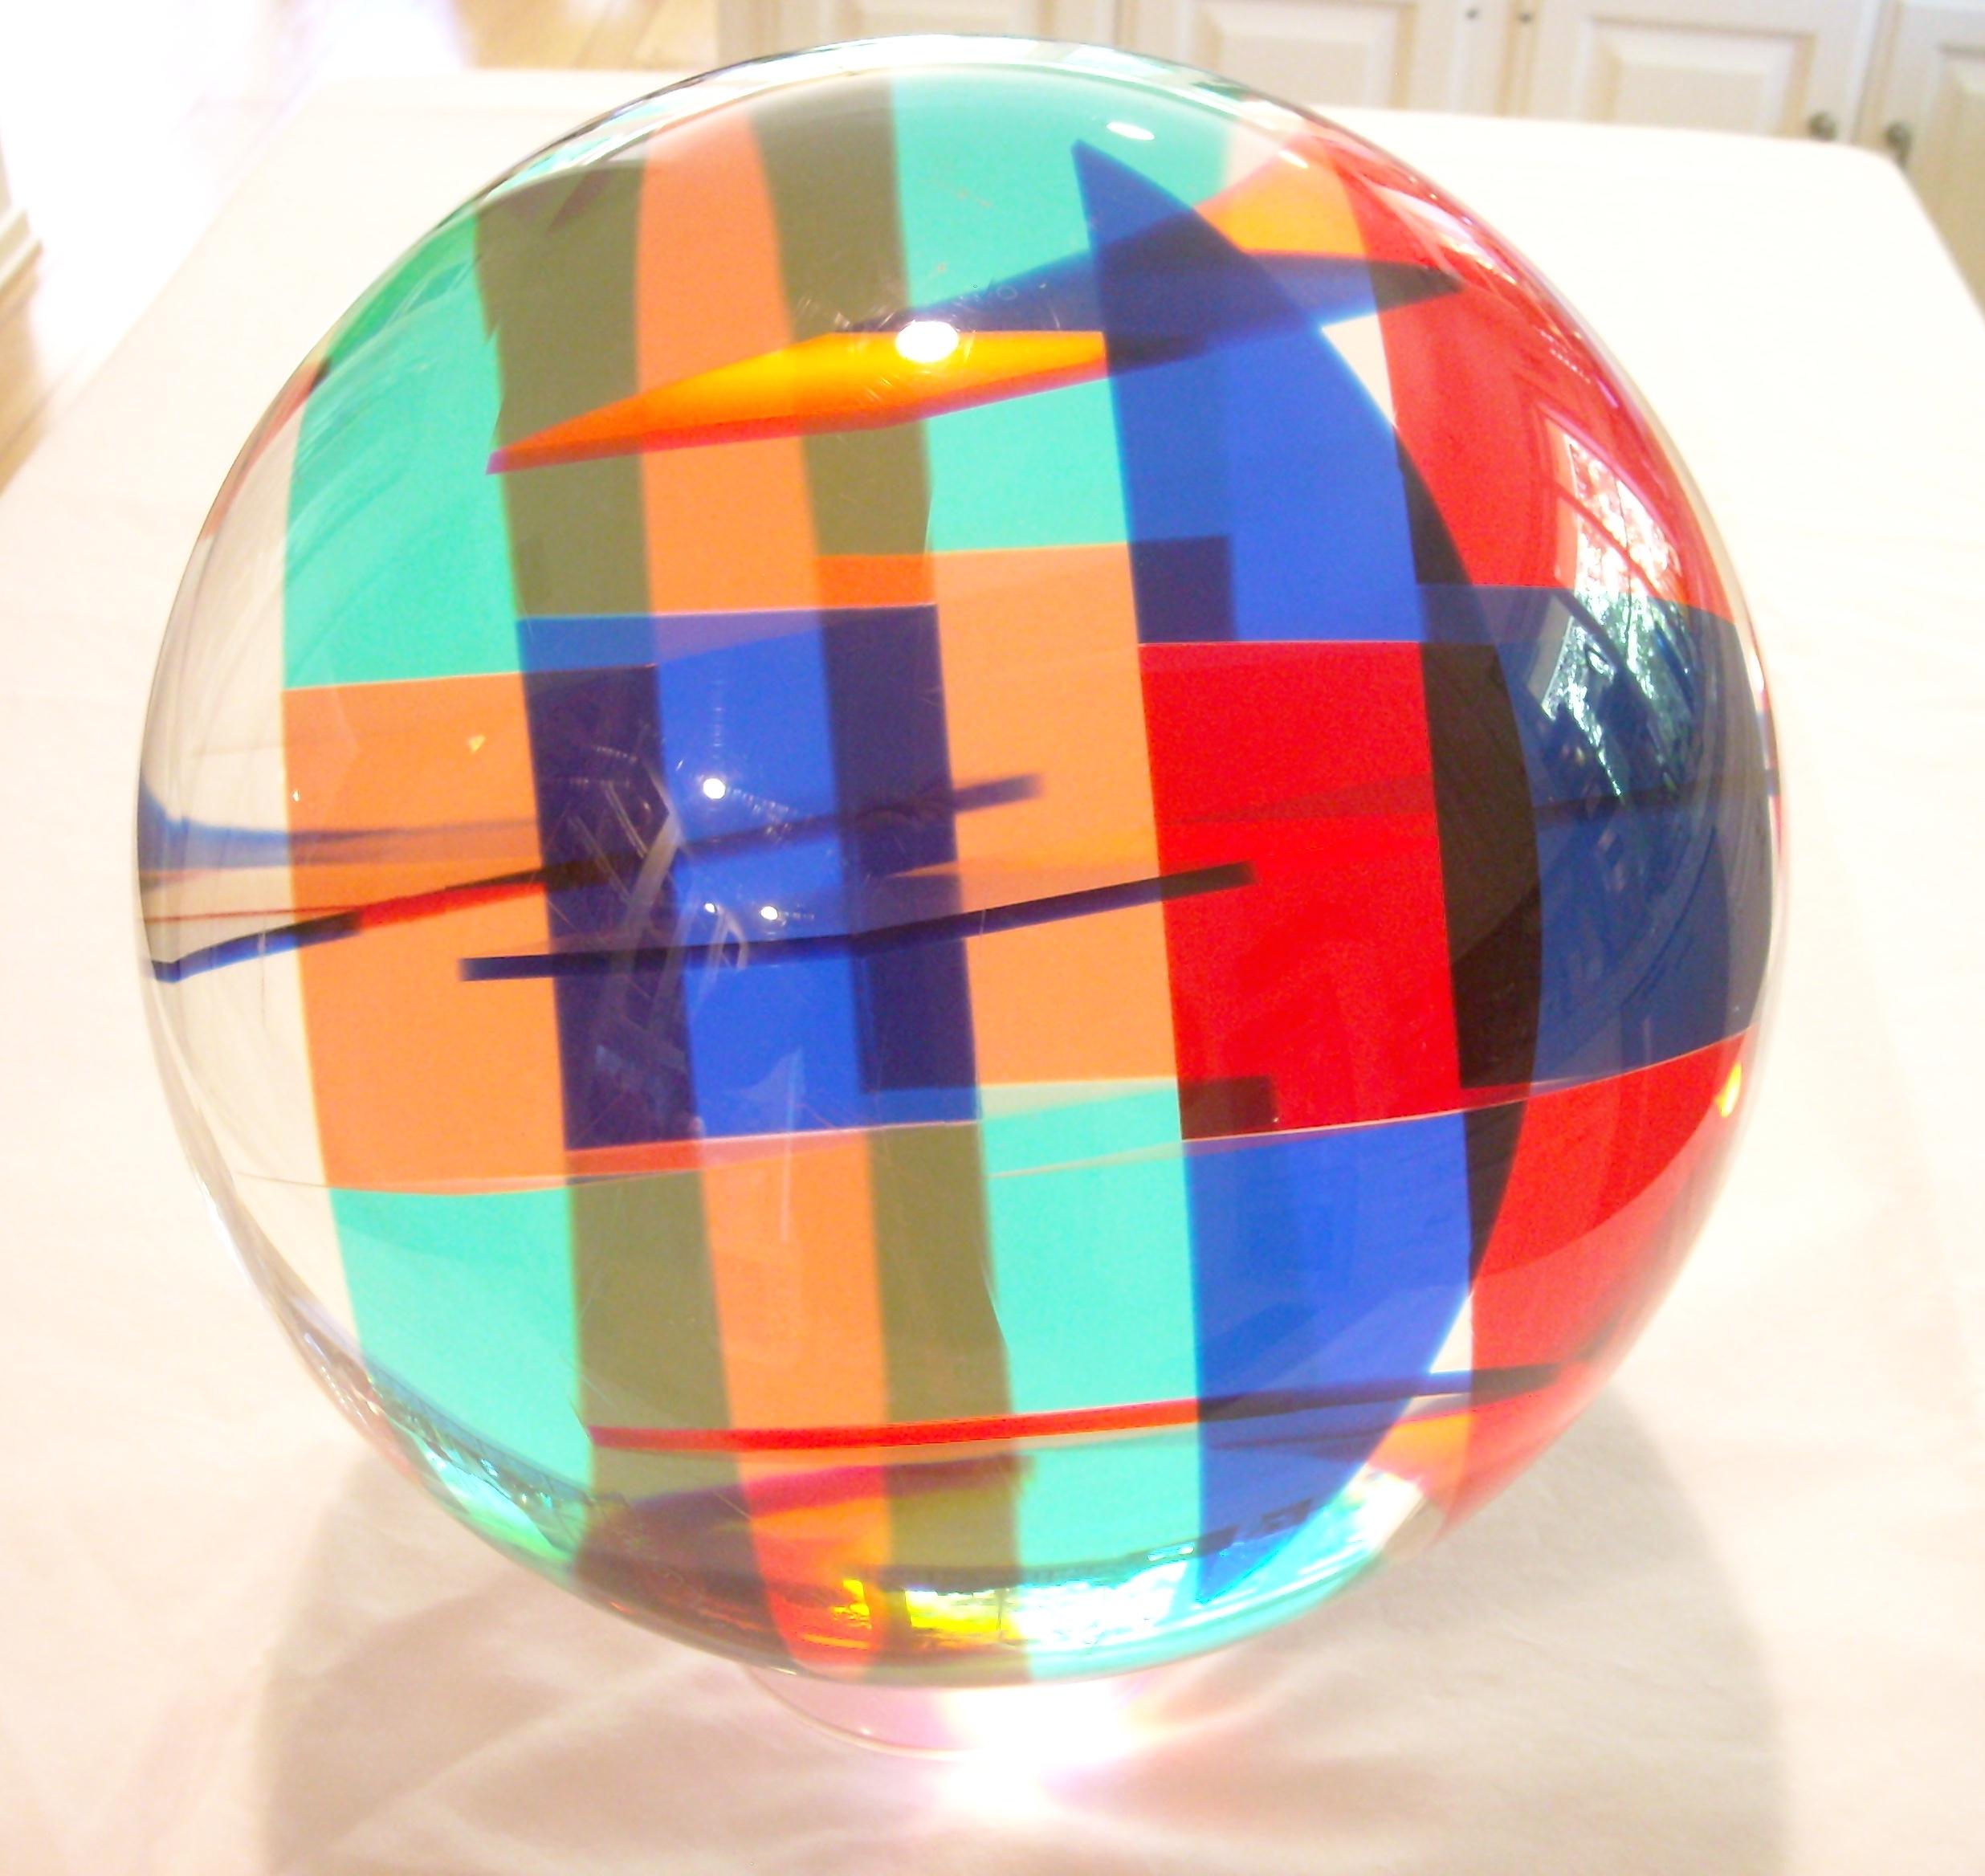 Great acrylic sphere by the well known artist Vasa. Comes with a clear base aprox 2 inches high, the sculpture /ball is 10 inches diameter. Signed and dated 1986 and archive # 2748.